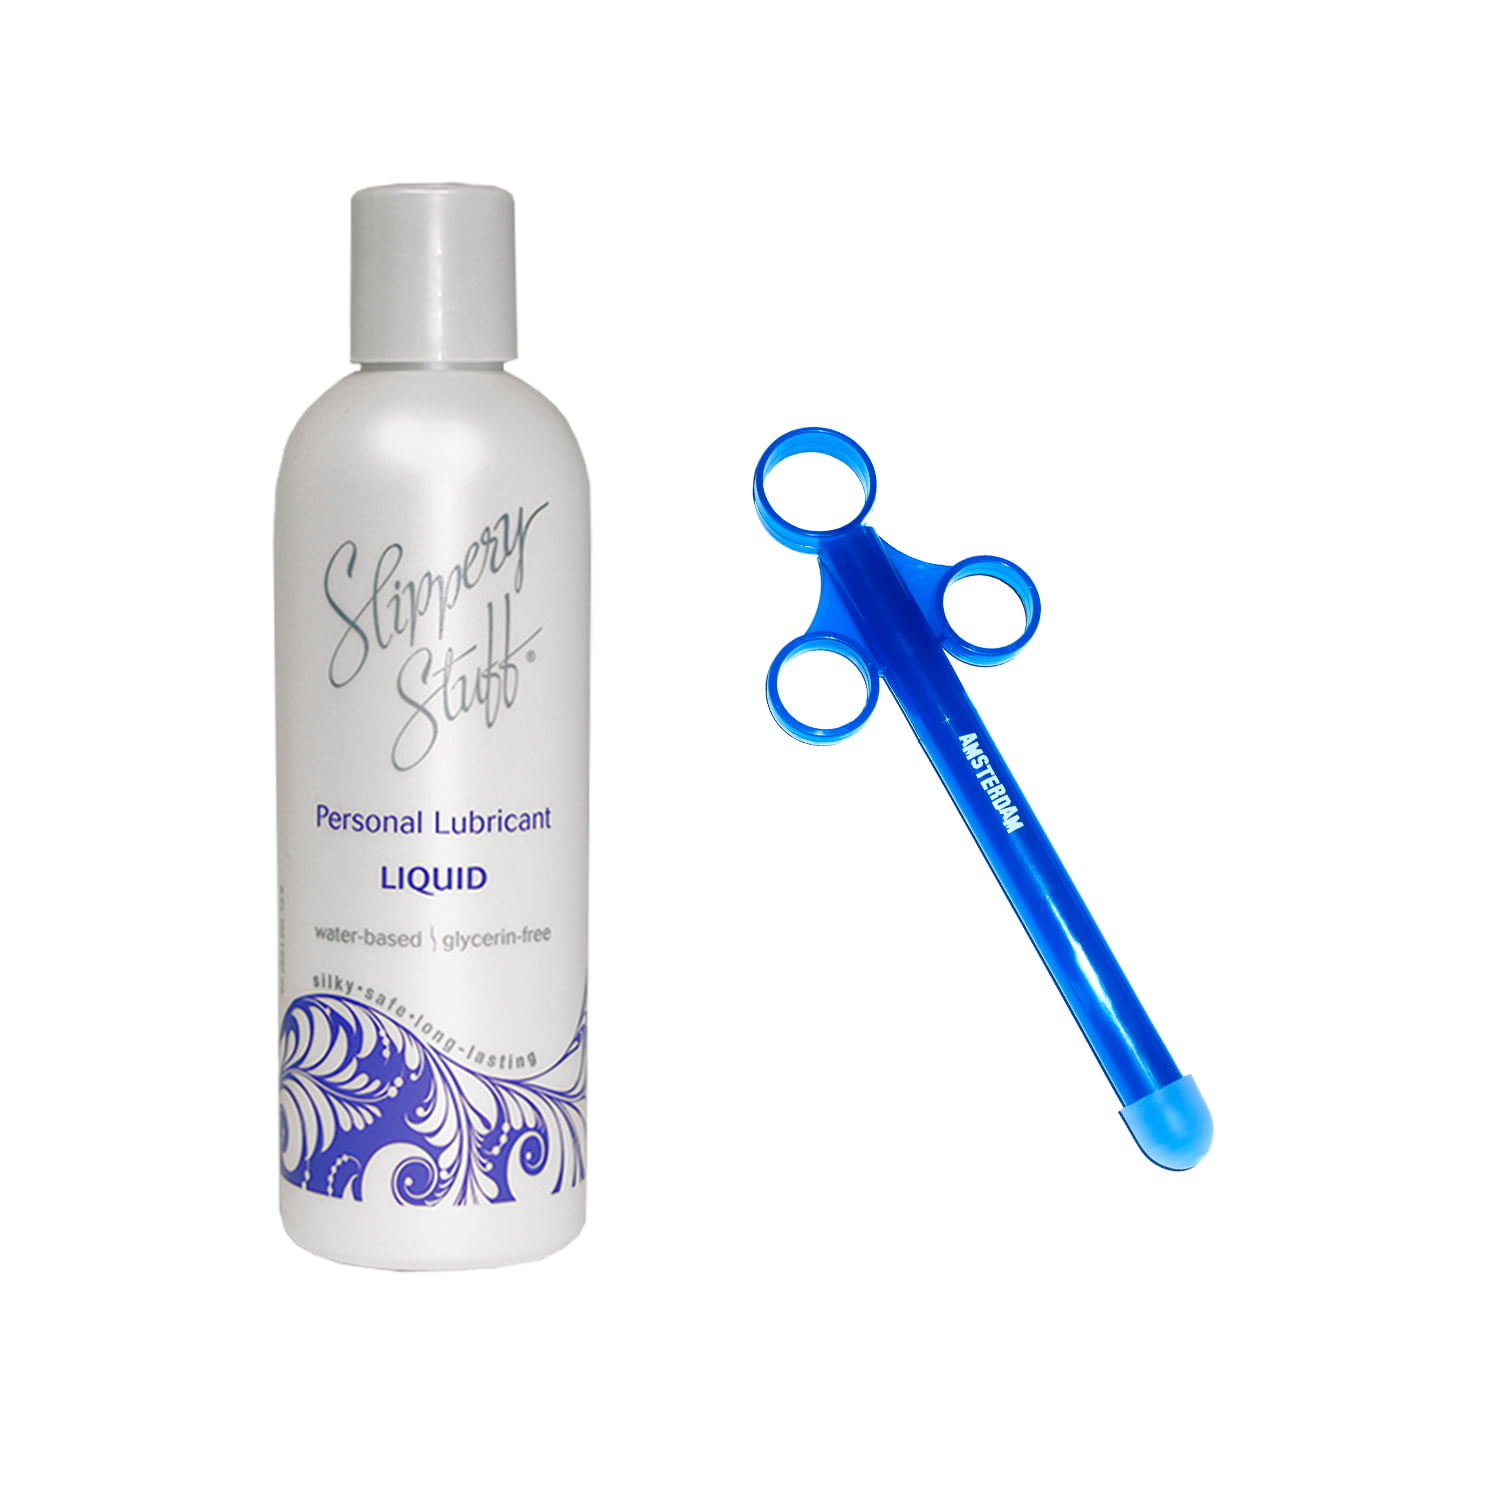 Slippery Stuff Liquid Lube Personal Lubricant And Amsterdam Personal 